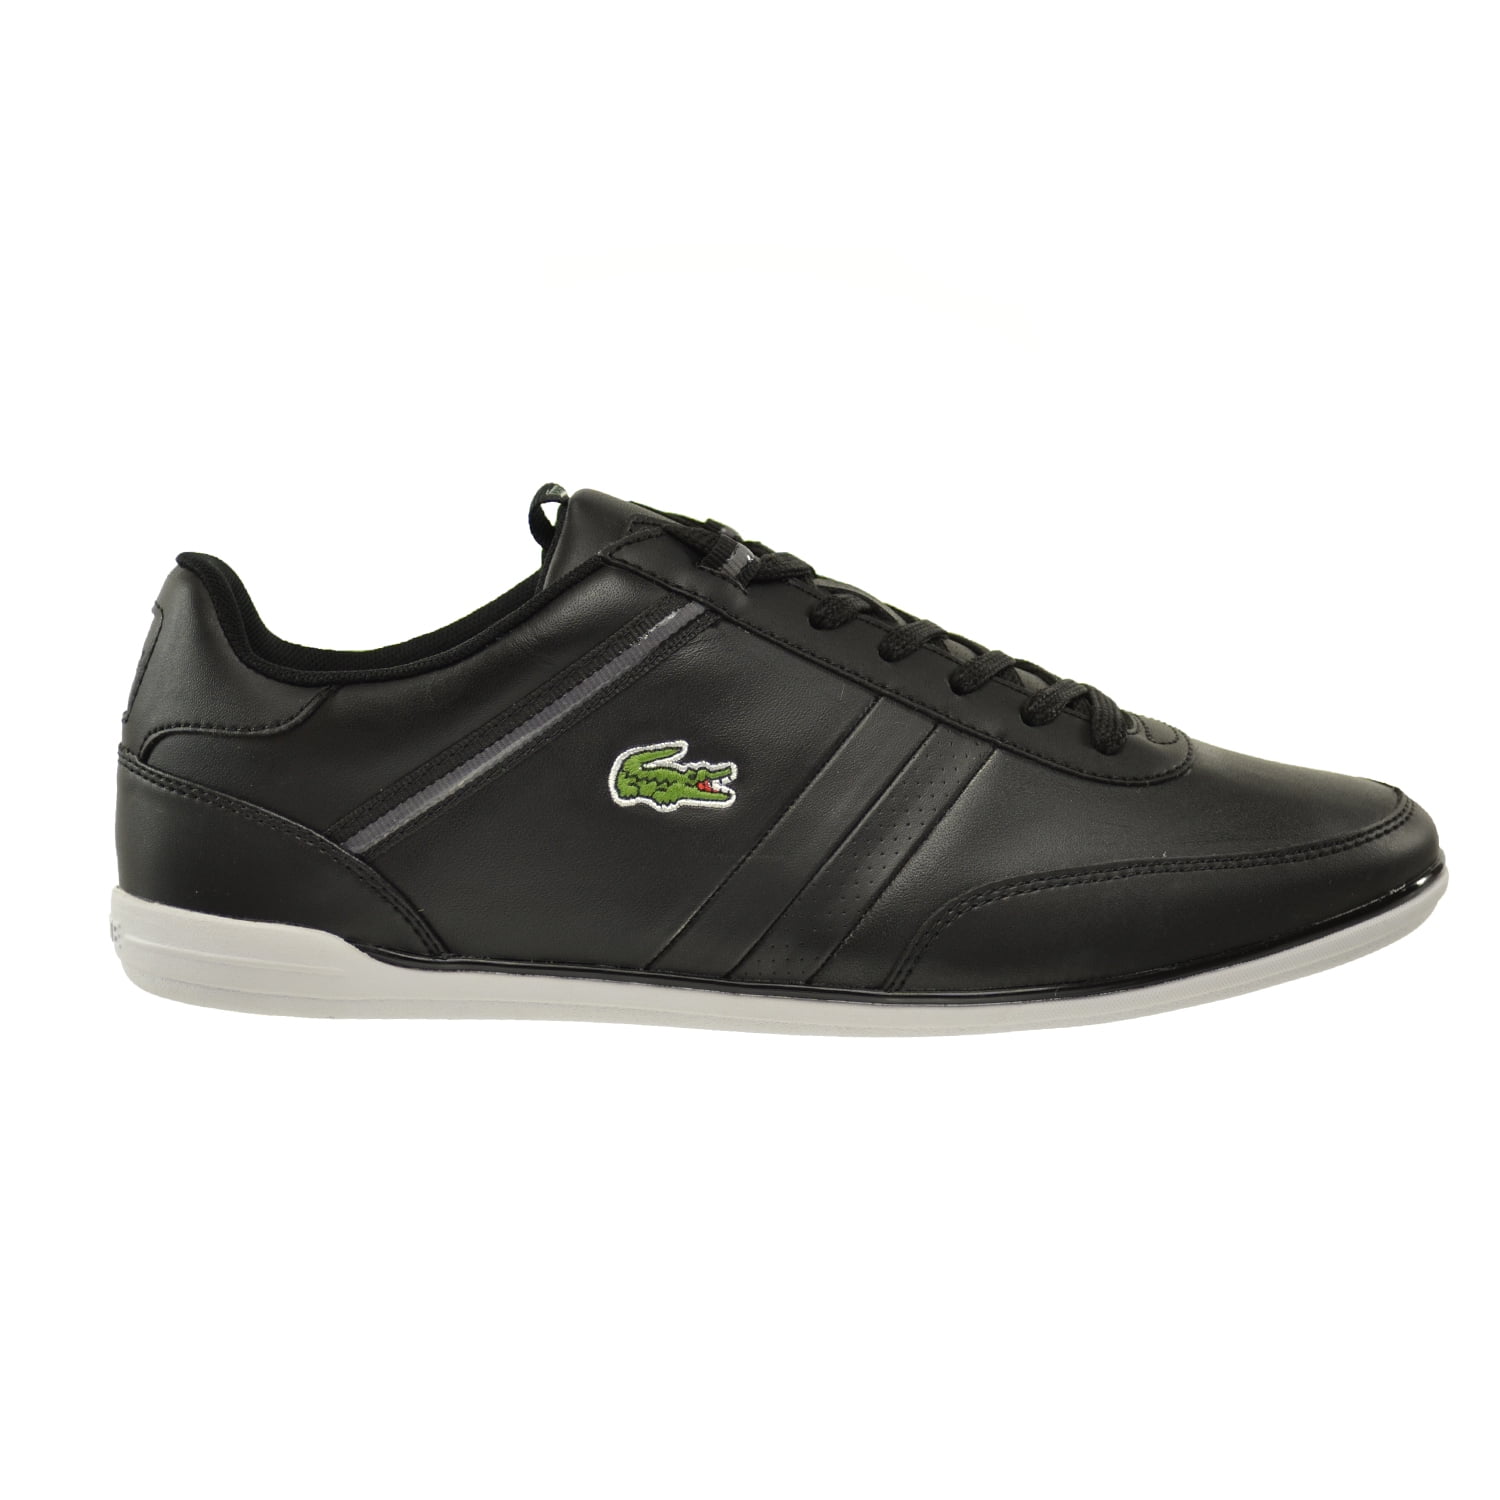 Lacoste Giron HTB SPM Leather/Synthetic Men's Shoes Black/Dark Grey 7 ...